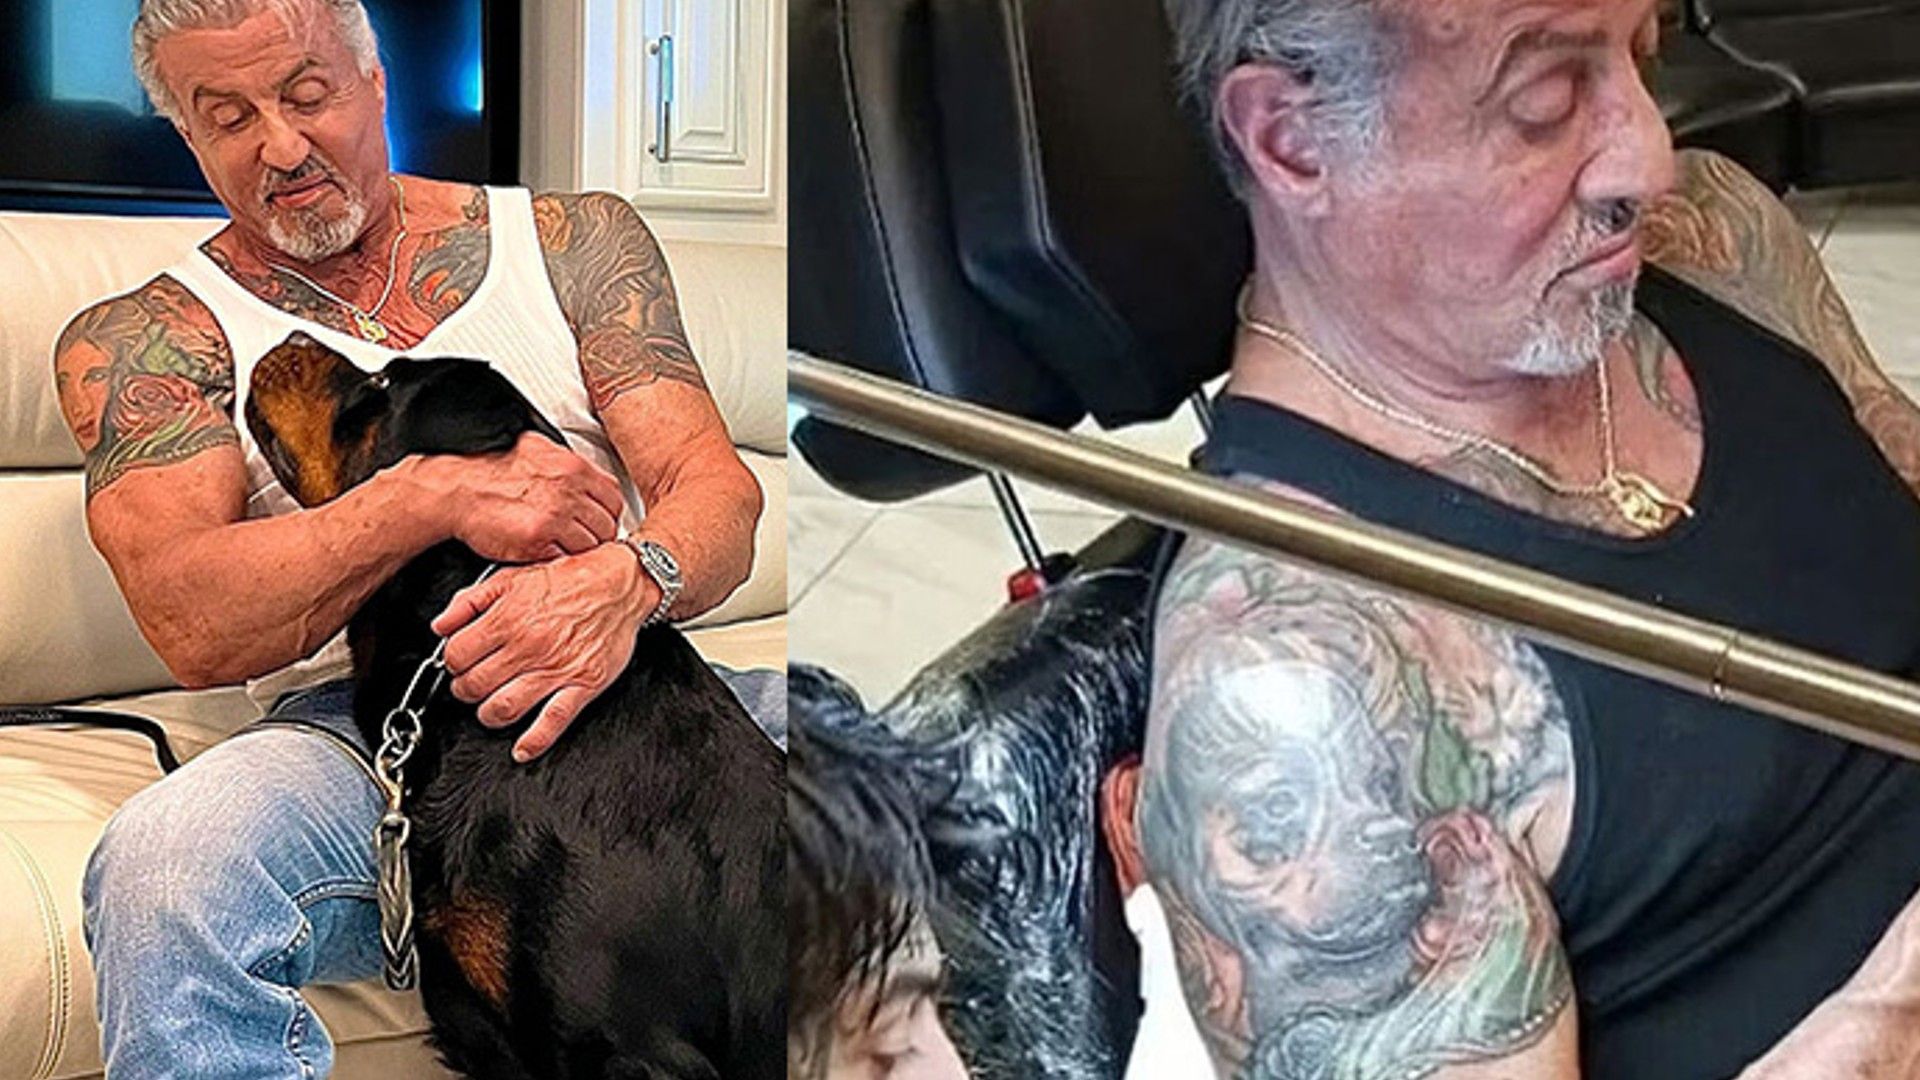 Did sylvester stallone get tattoos to cover stretch marks